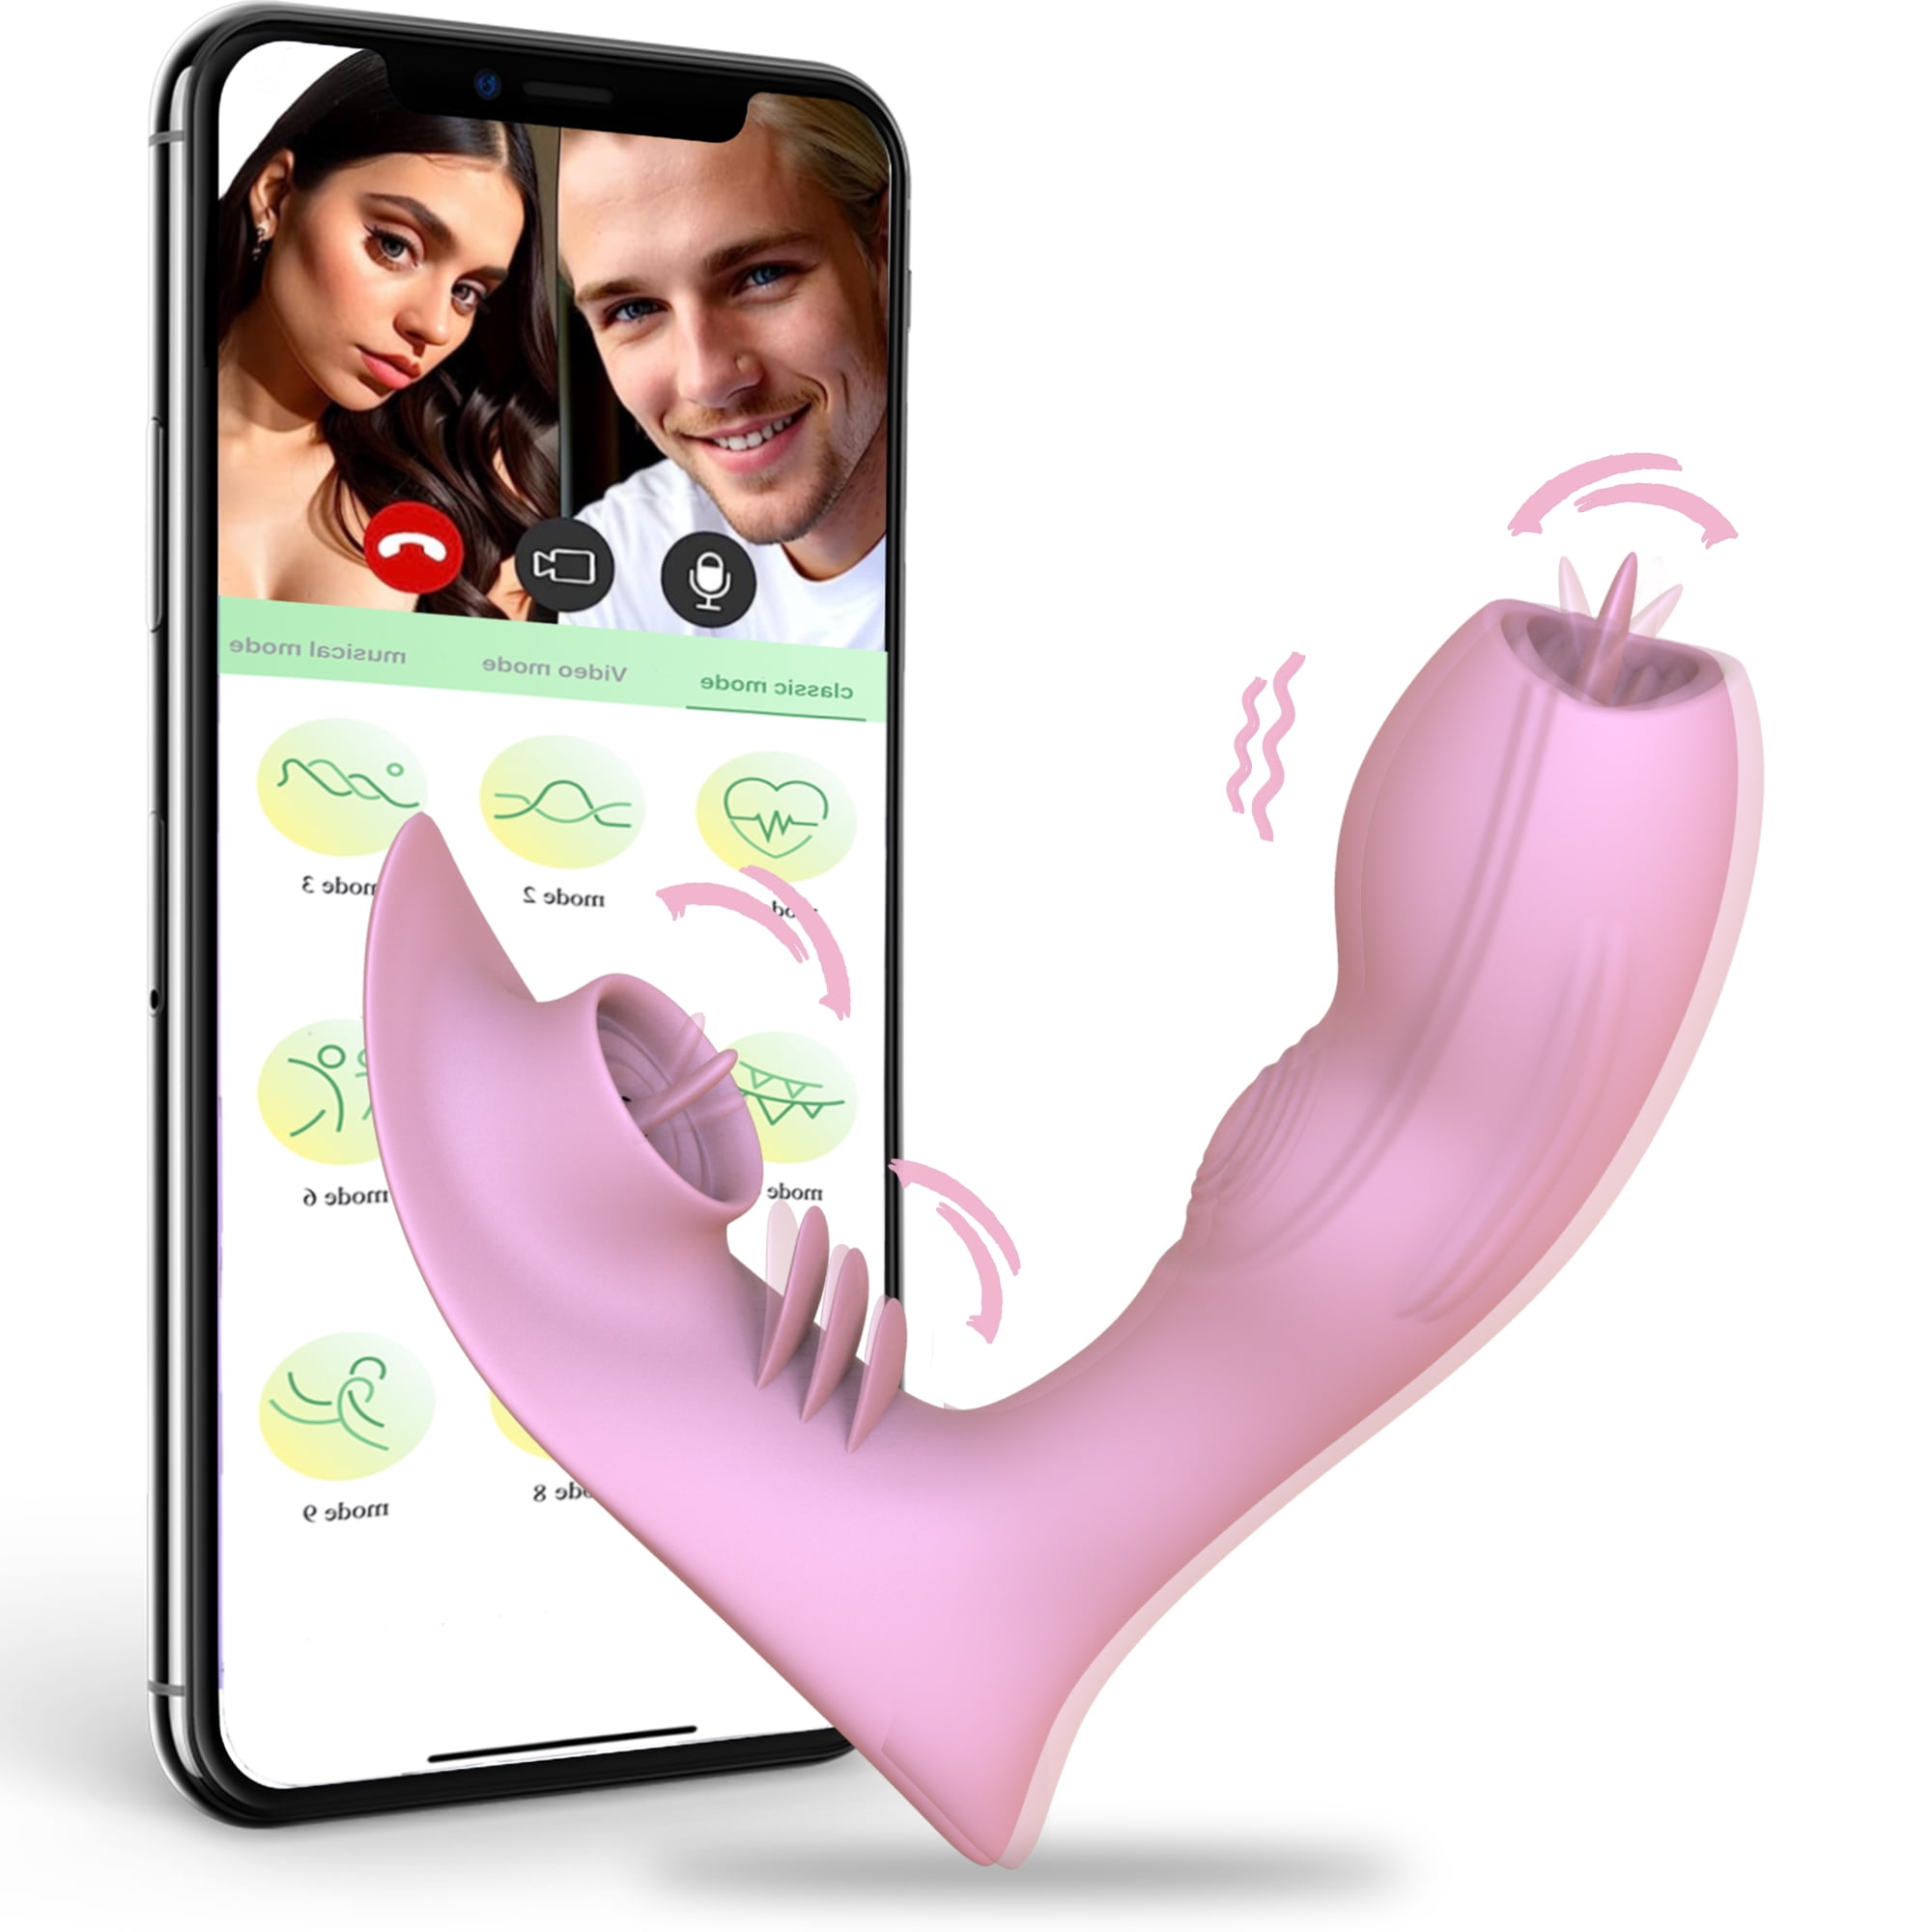 Erifxes Vibrator Vbrators Sex Toys for Women App Remote Control Wearable Bluetooth Adult Toy with Triple Tongue Licking, Invisible Butterfly Vibrating Panty G Spot Clitoral Stimulator Couples Pleasure